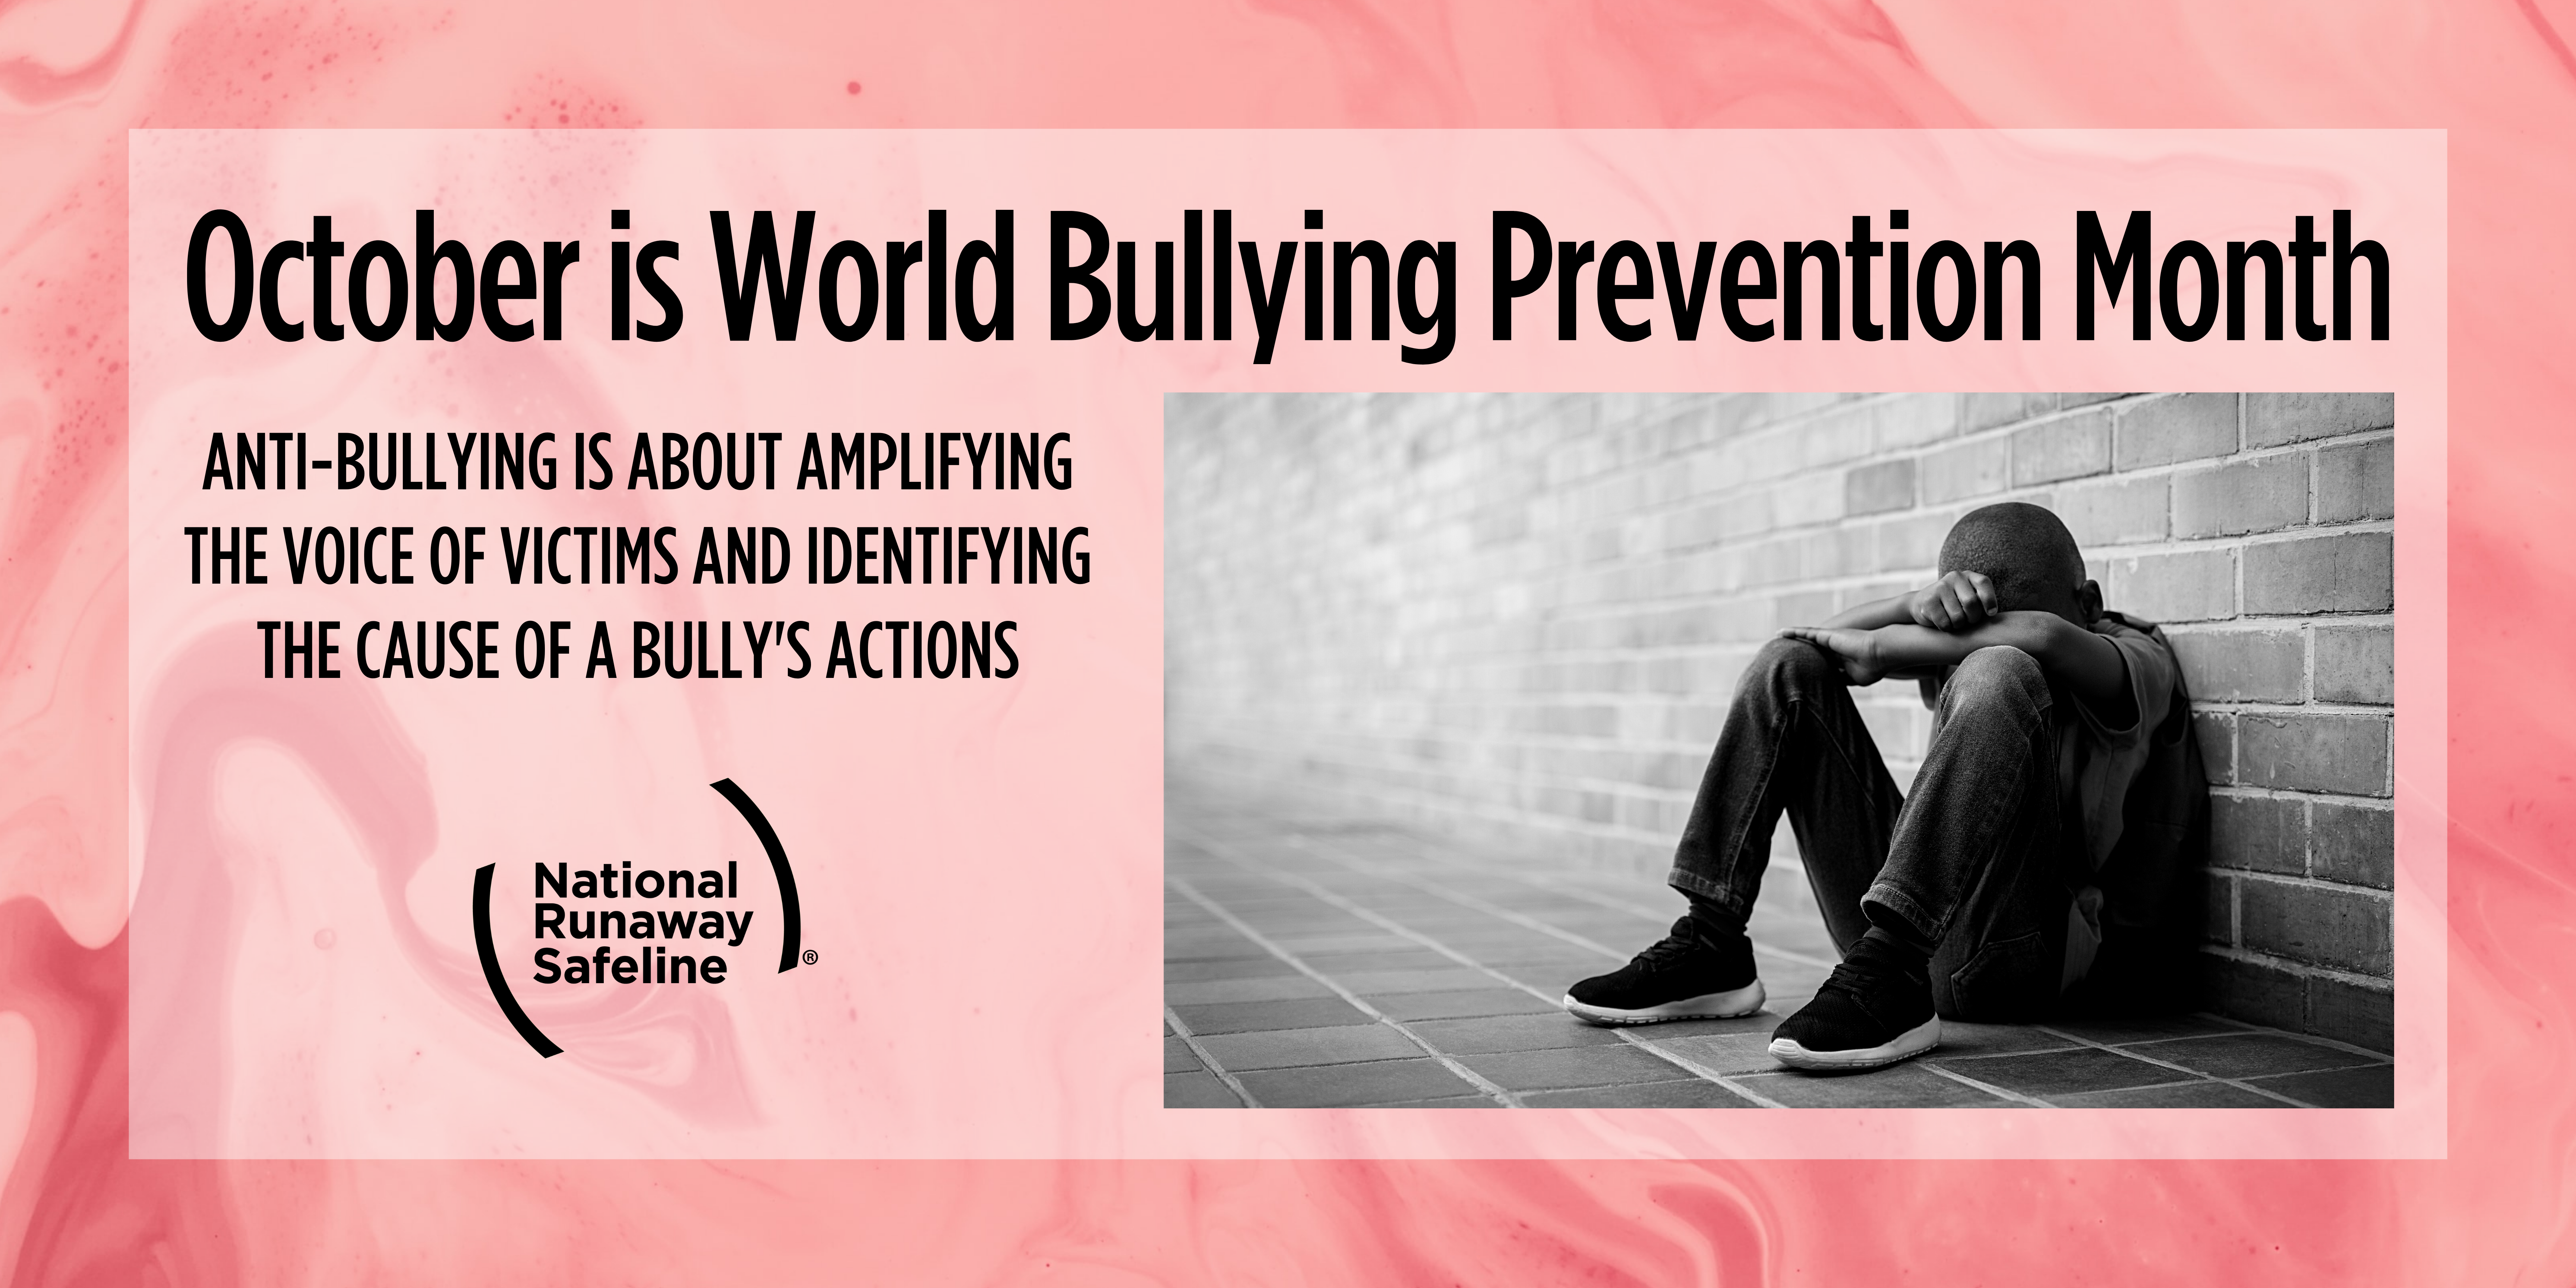 October is World Bullying Prevention Month